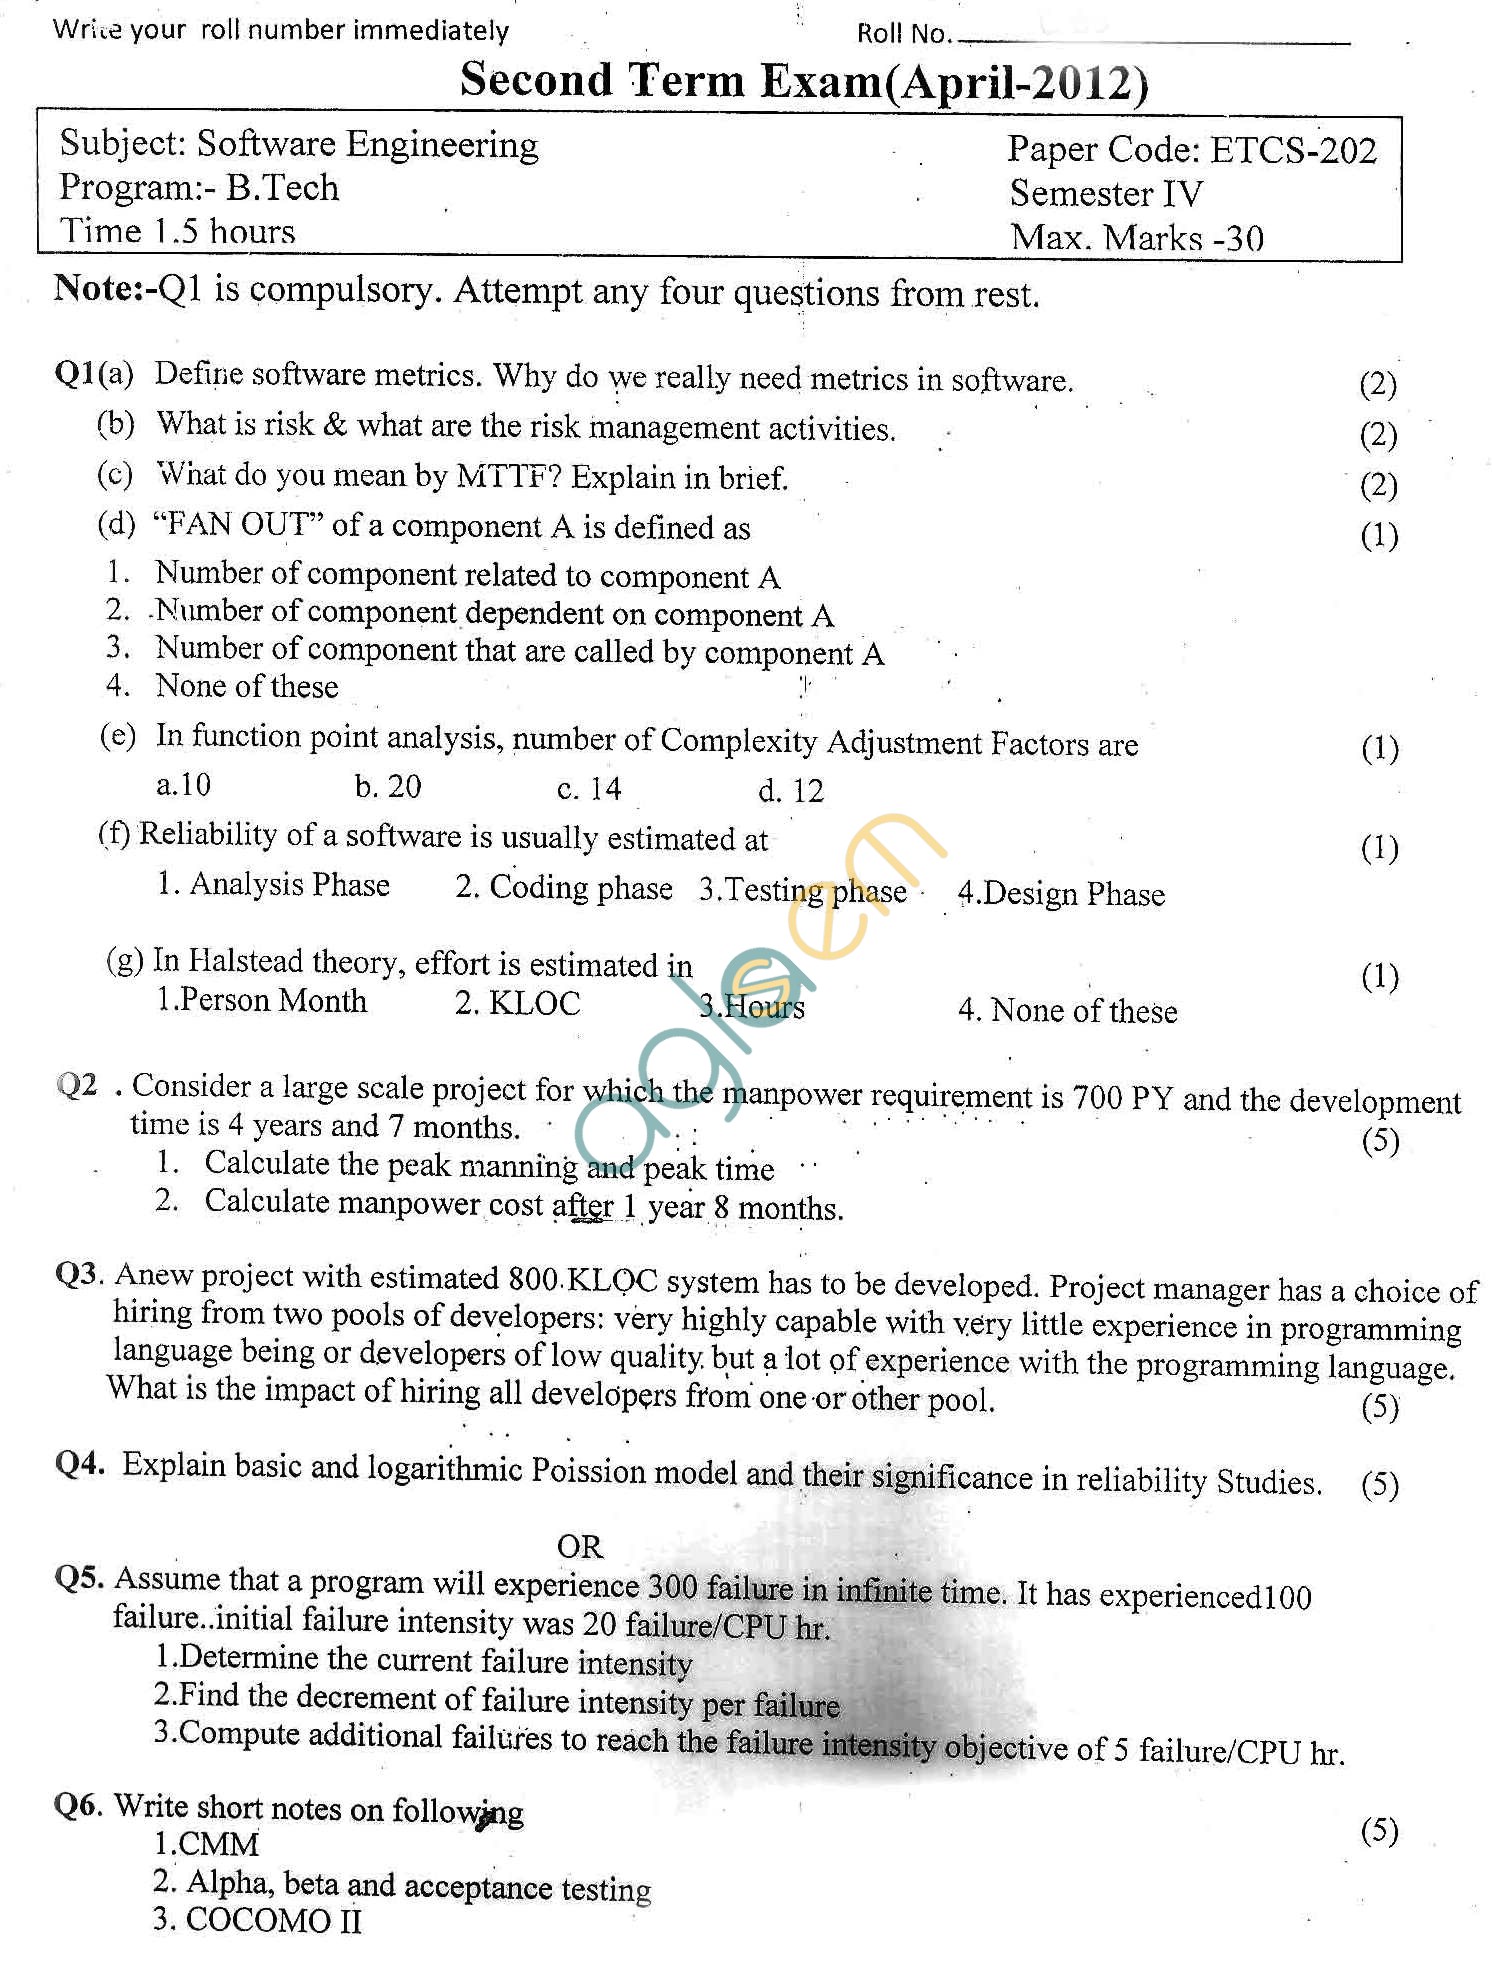 GGSIPU Question Papers Fourth Semester  Second Term 2012  ETCS-202